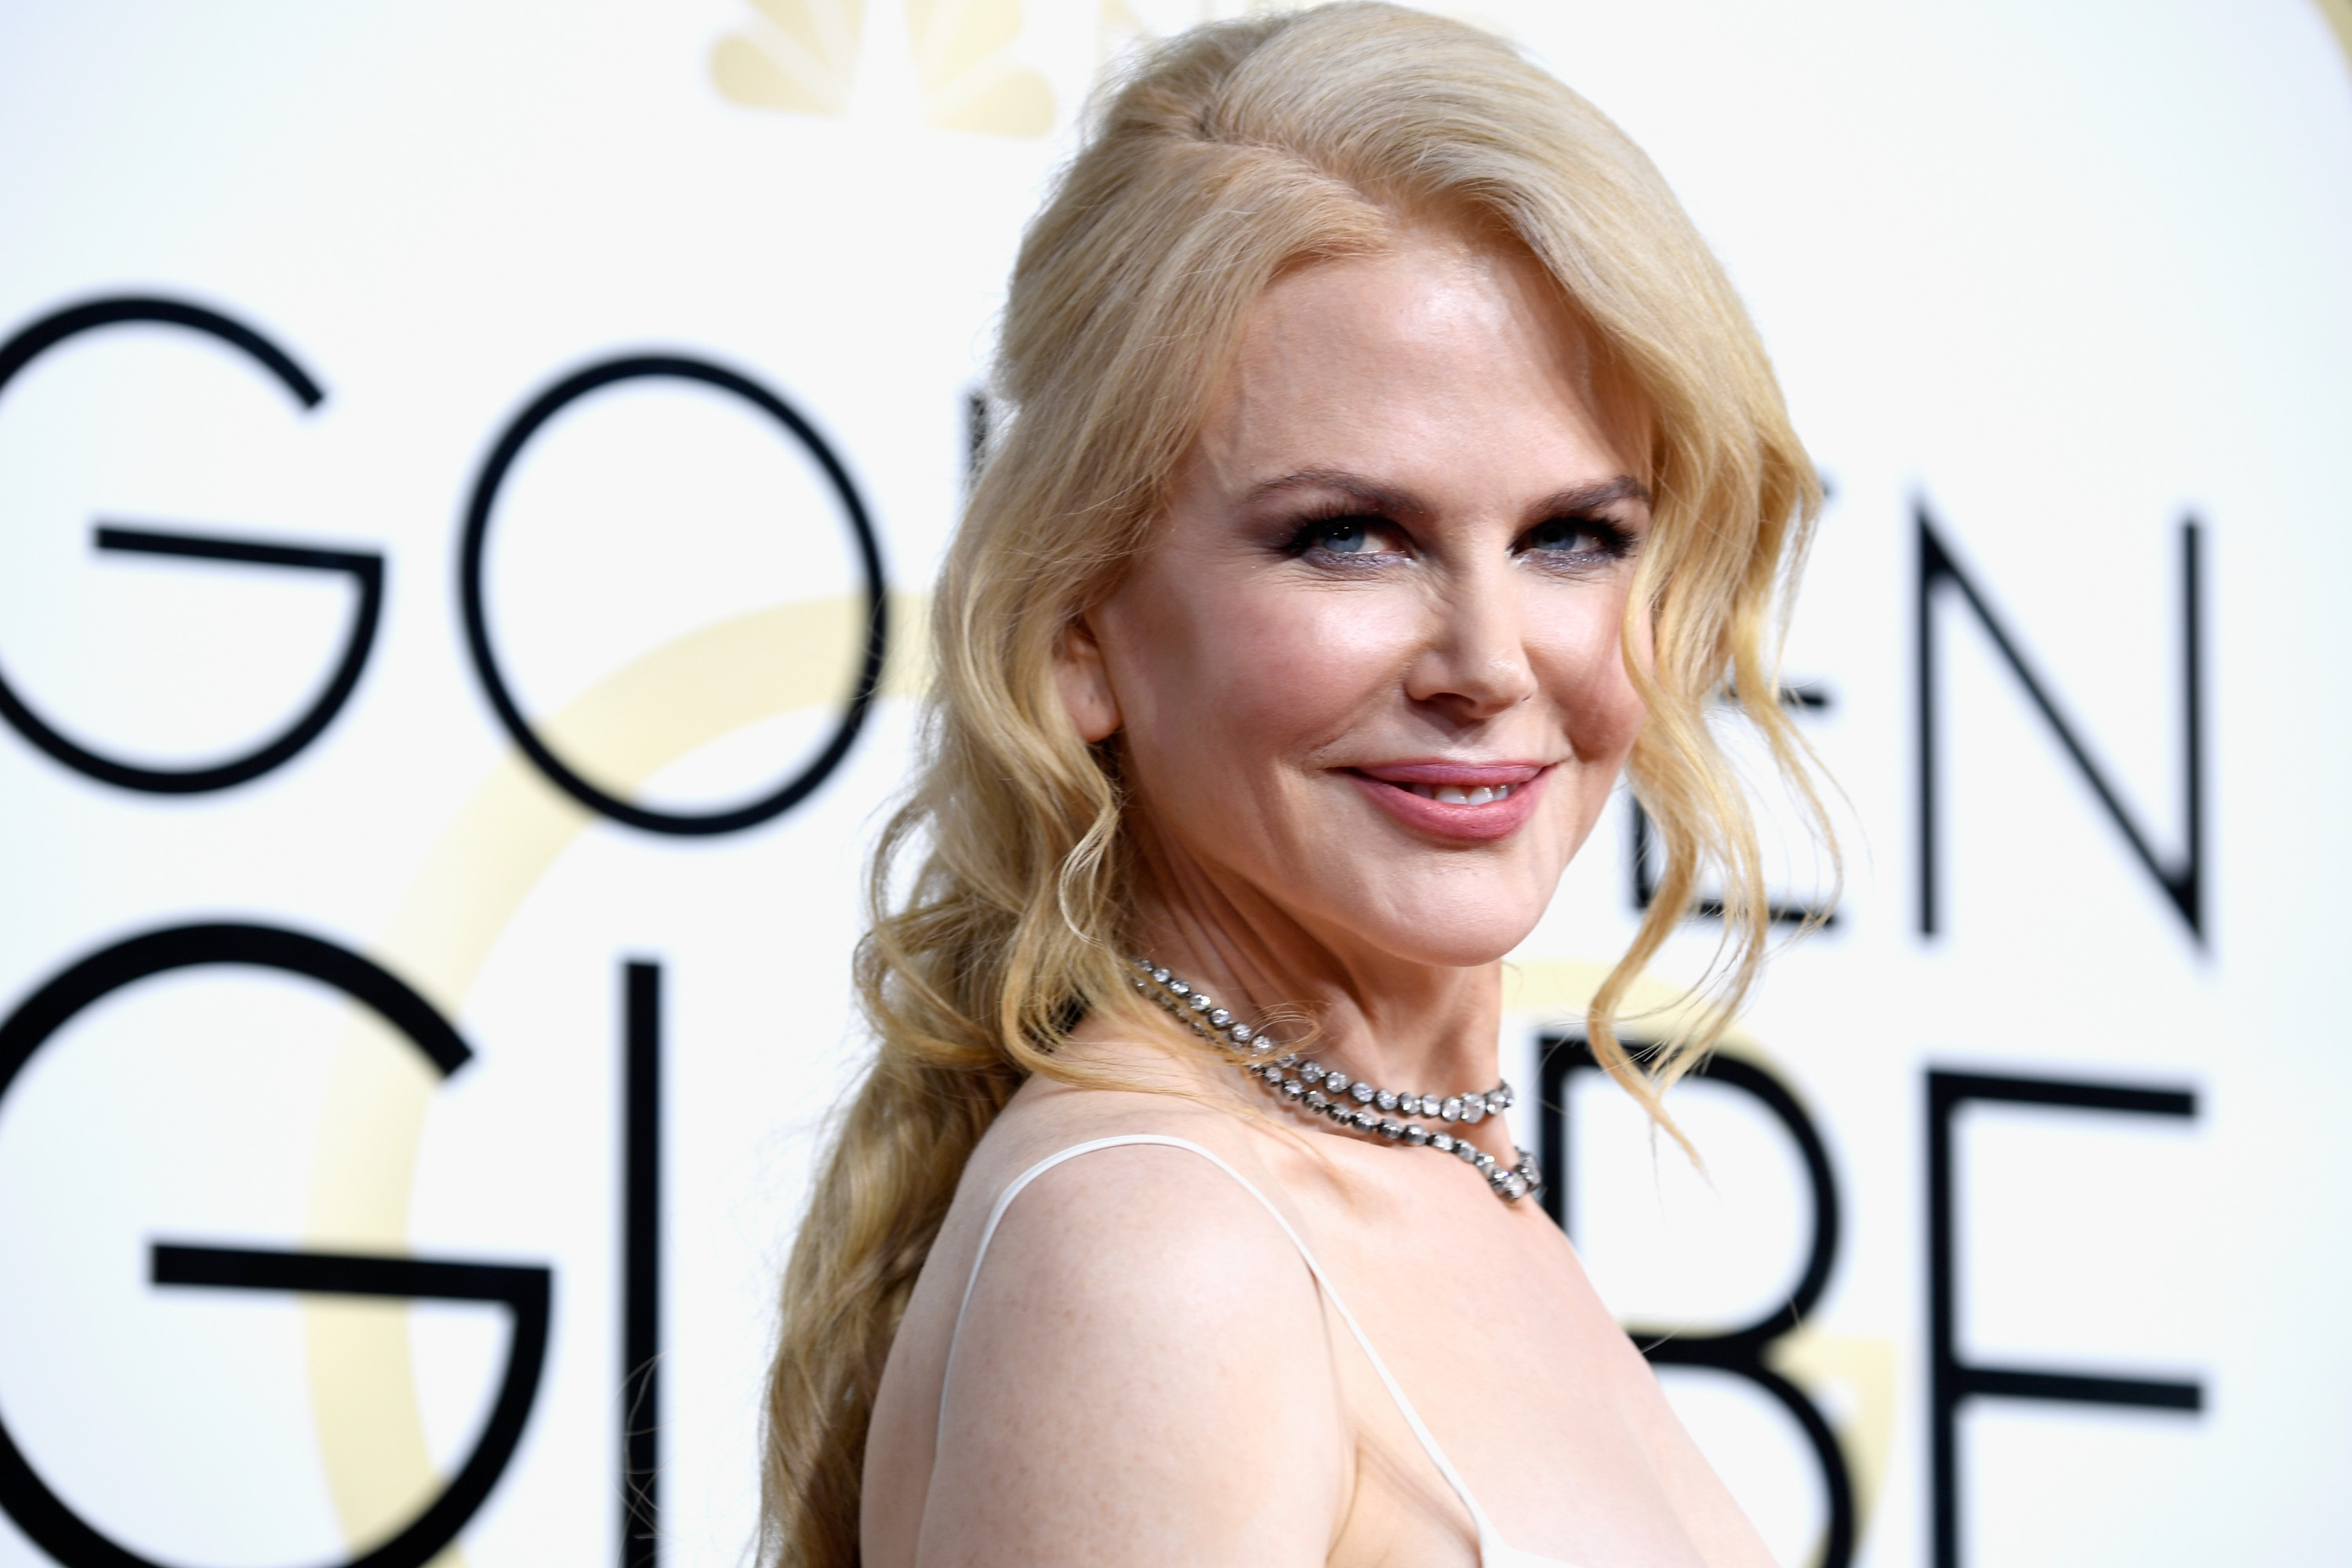 Actress Nicole Kidman attends the 74th Annual Golden Globe Awards at The Beverly Hilton Hotel on January 8, 2017 in Beverly Hills, California. (Frazer Harrison—Getty Images)